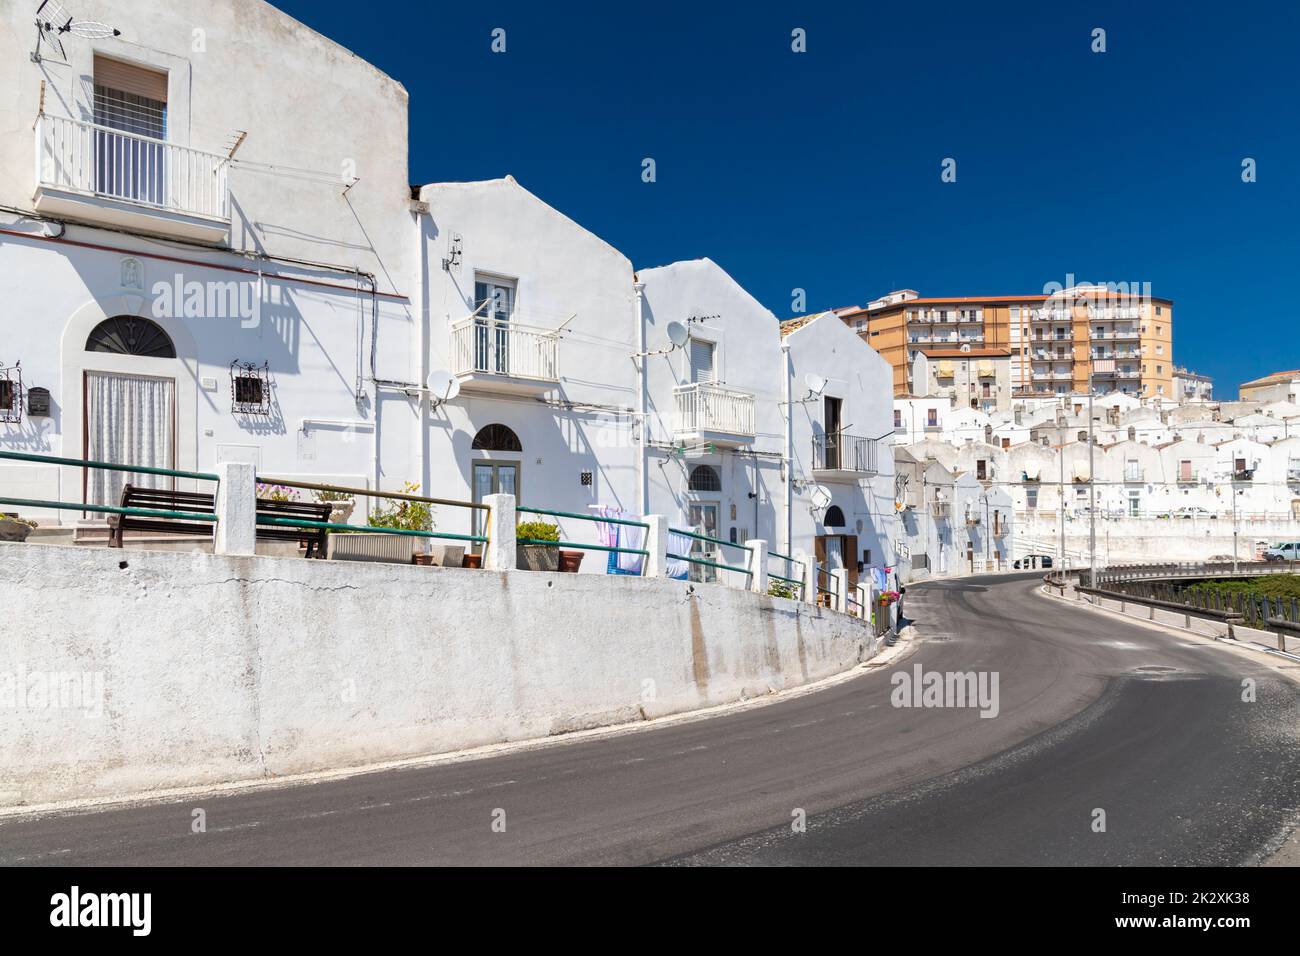 Old town in Monte Sant Angelo, Puglia, Italy Stock Photo